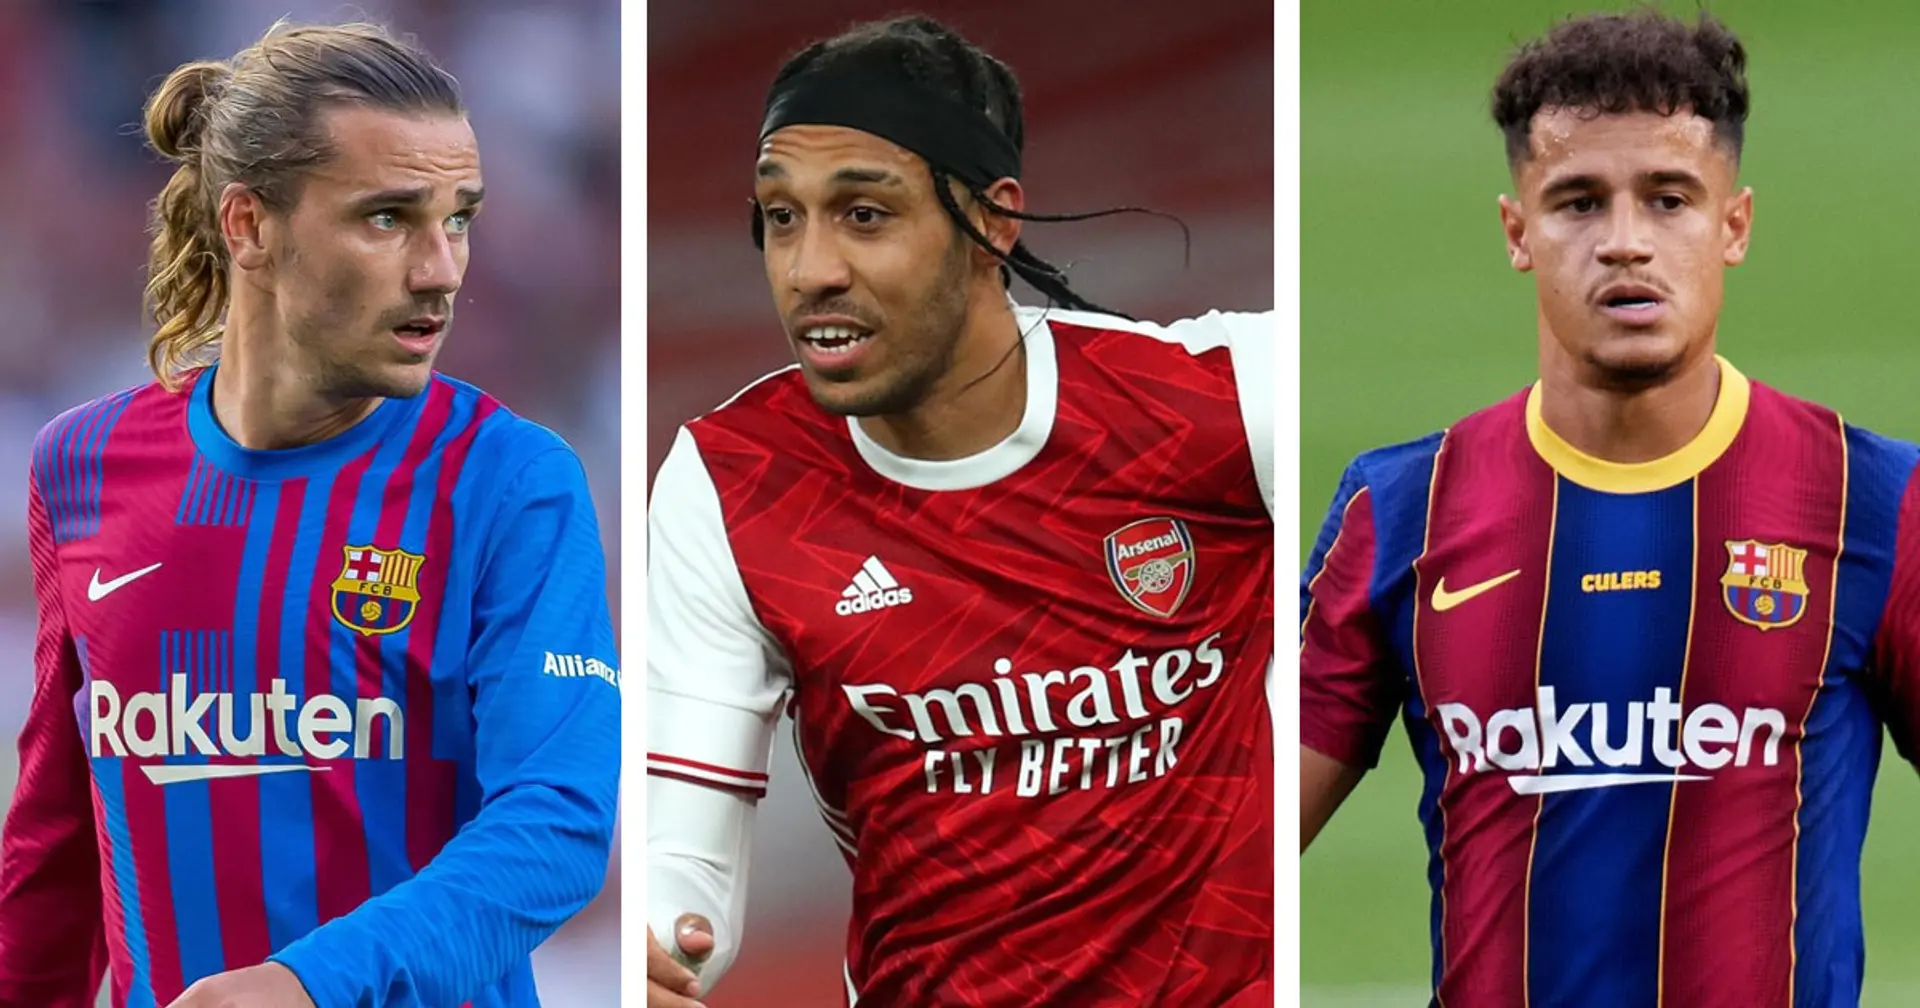 Coutinho swapped for Aubameyang & 3 more transfer rumours you should believe the least now